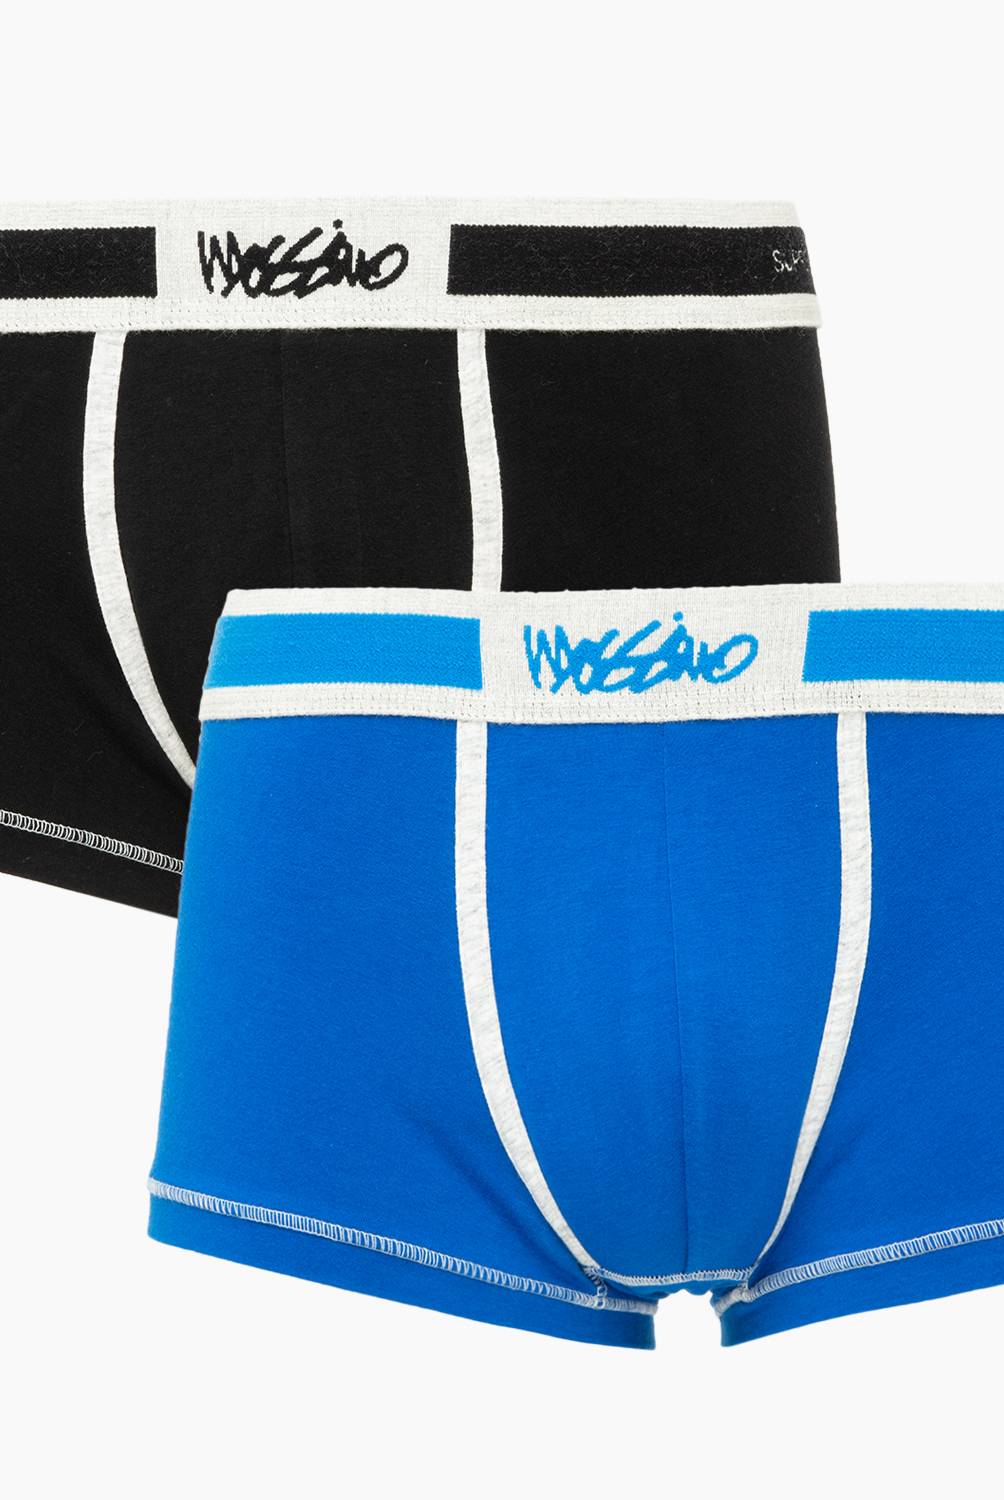 MOSSIMO - Pack 2 Boxer